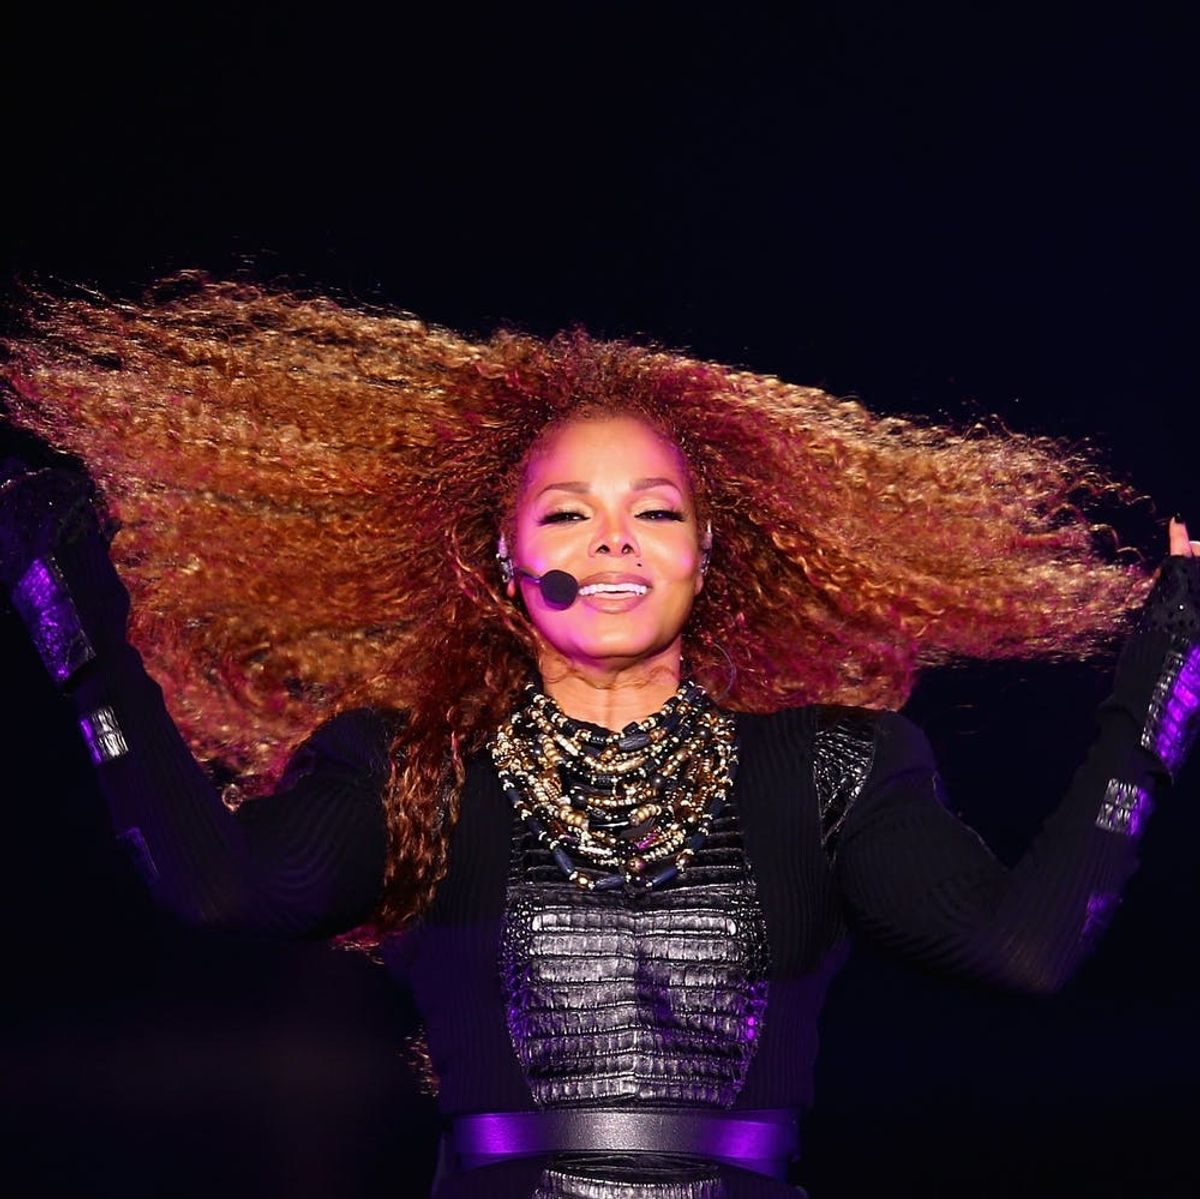 50-Year-Old Janet Jackson Has Welcomed Her New Baby Boy